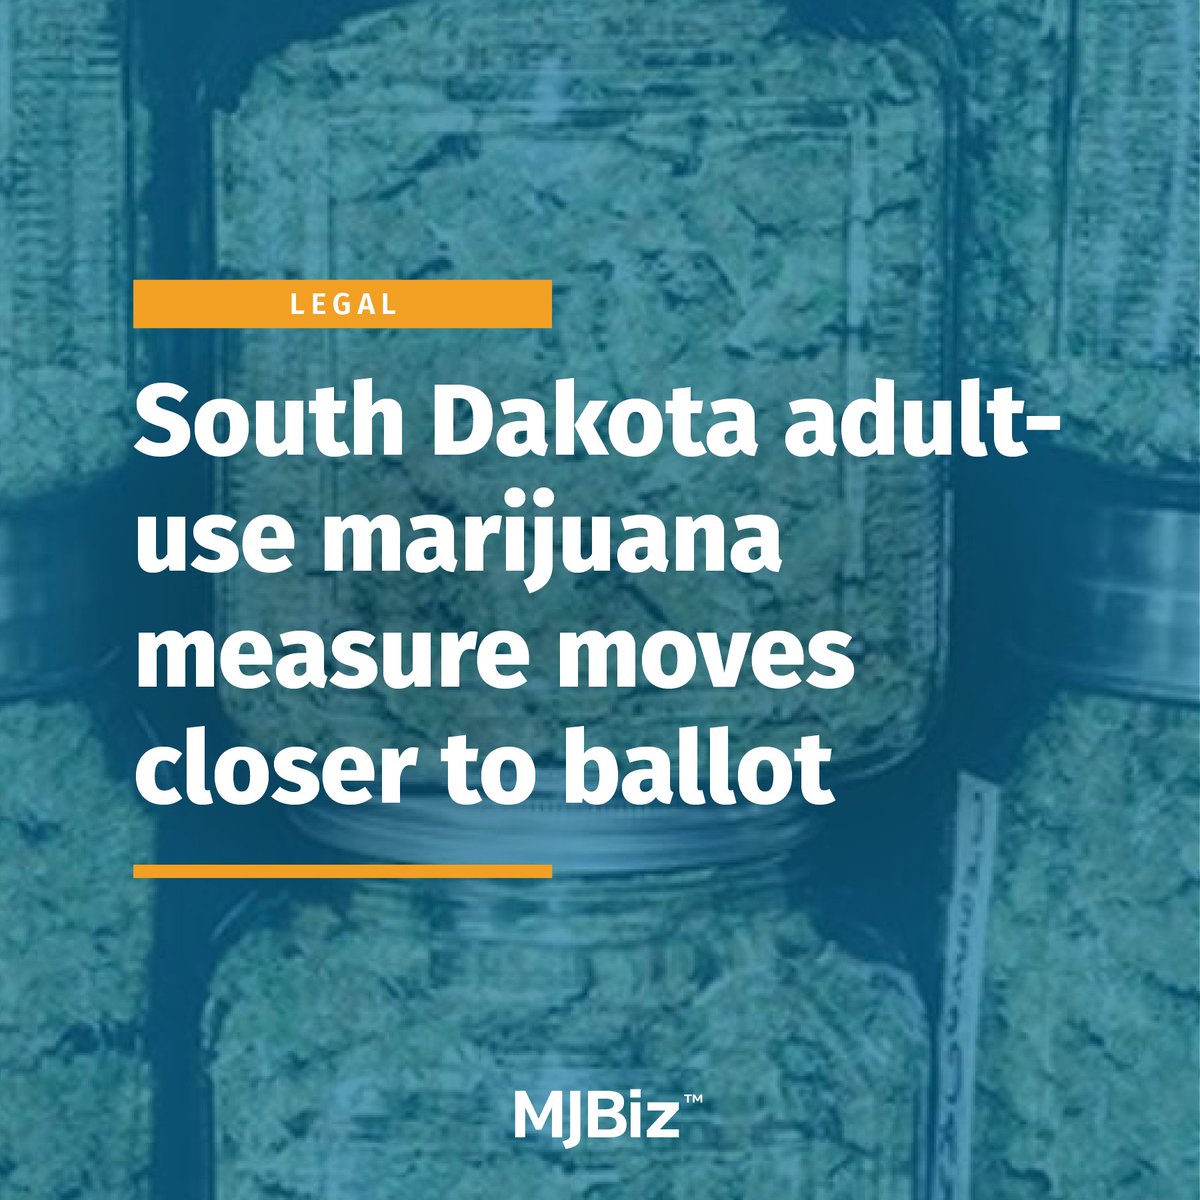 #Cannabis advocates in #SouthDakota submitted roughly 29,000 signatures this week to get an adult-use marijuana legalization referendum on the state’s November ballot. Read the story: bit.ly/4dzlu0y (Photo by openrangestock/stock.adobe.com)